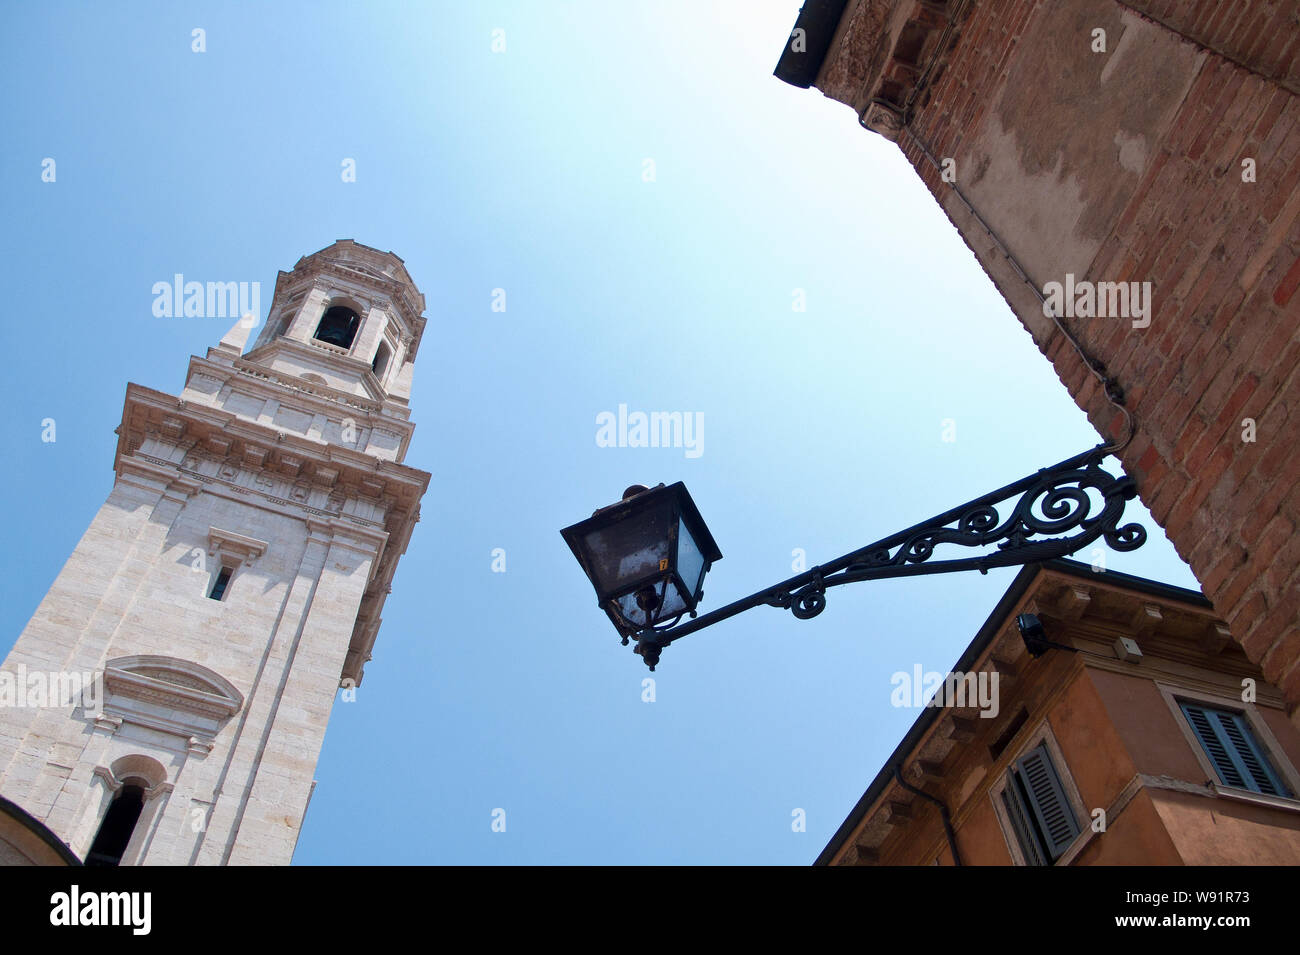 Low angle views of Verona Cathedral seen through residential houses, Verona, Italy Stock Photo